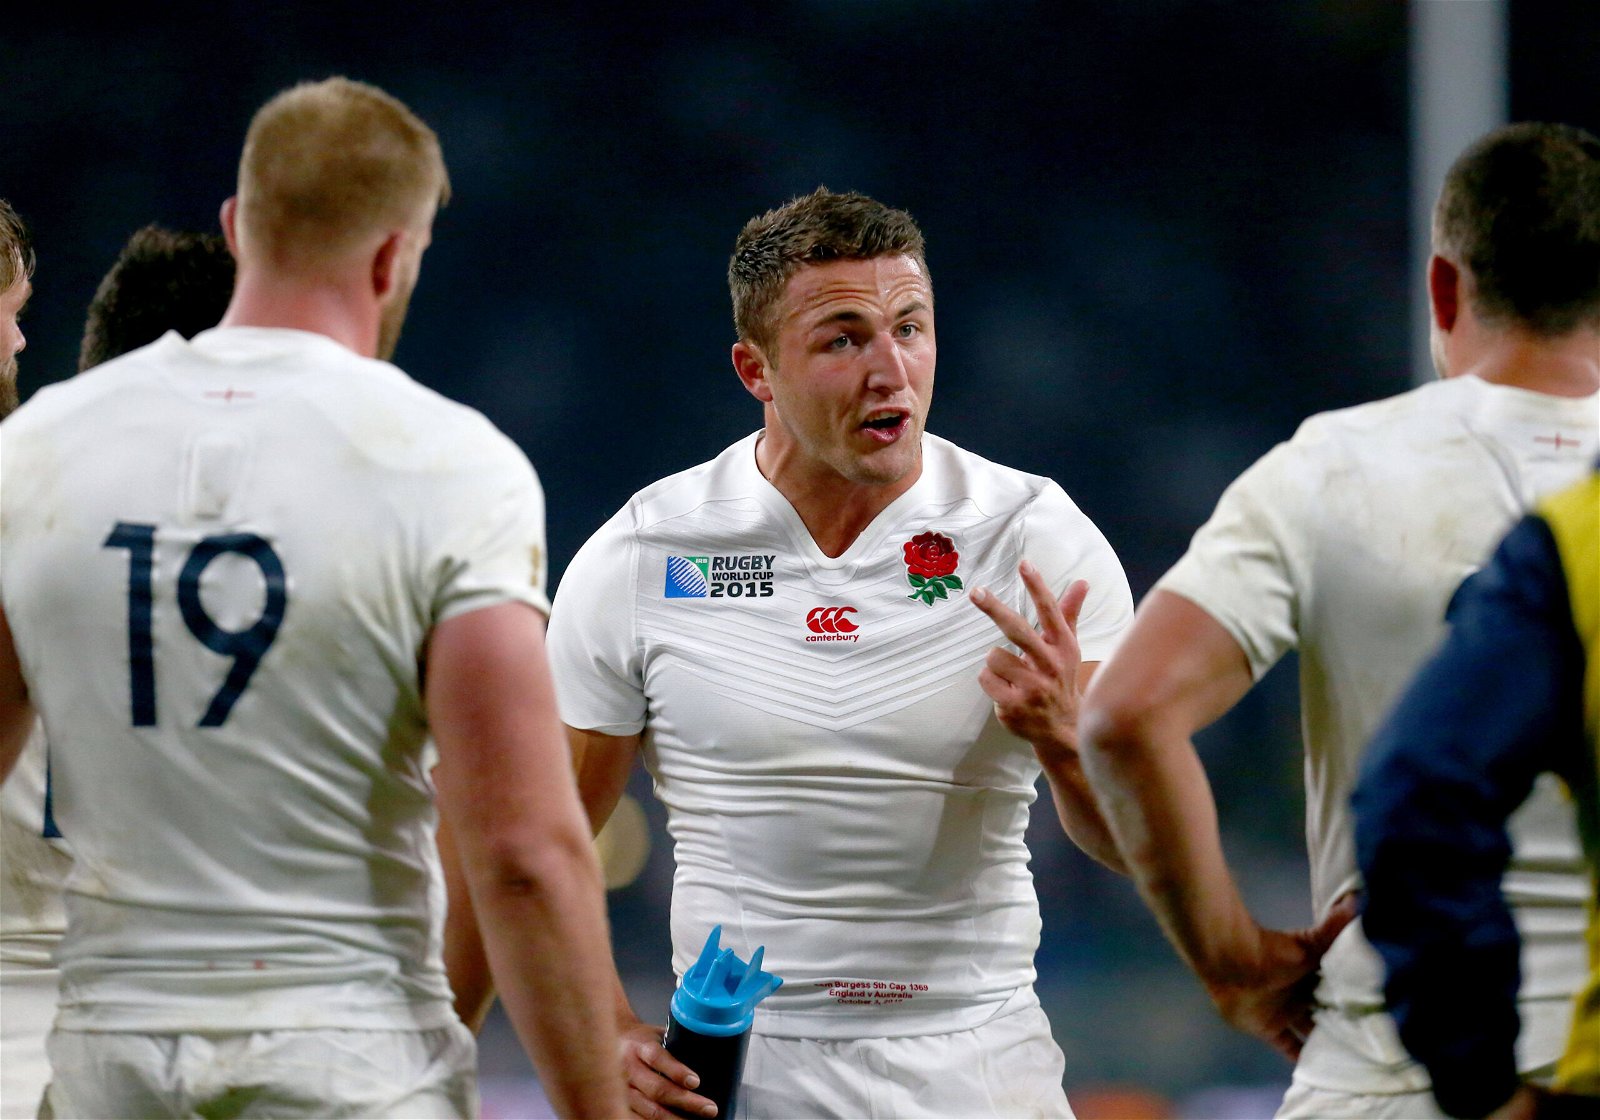 Sam Burgess was used as a scapegoat after England's group stage exit in the 2015 Rugby Union World Cup.